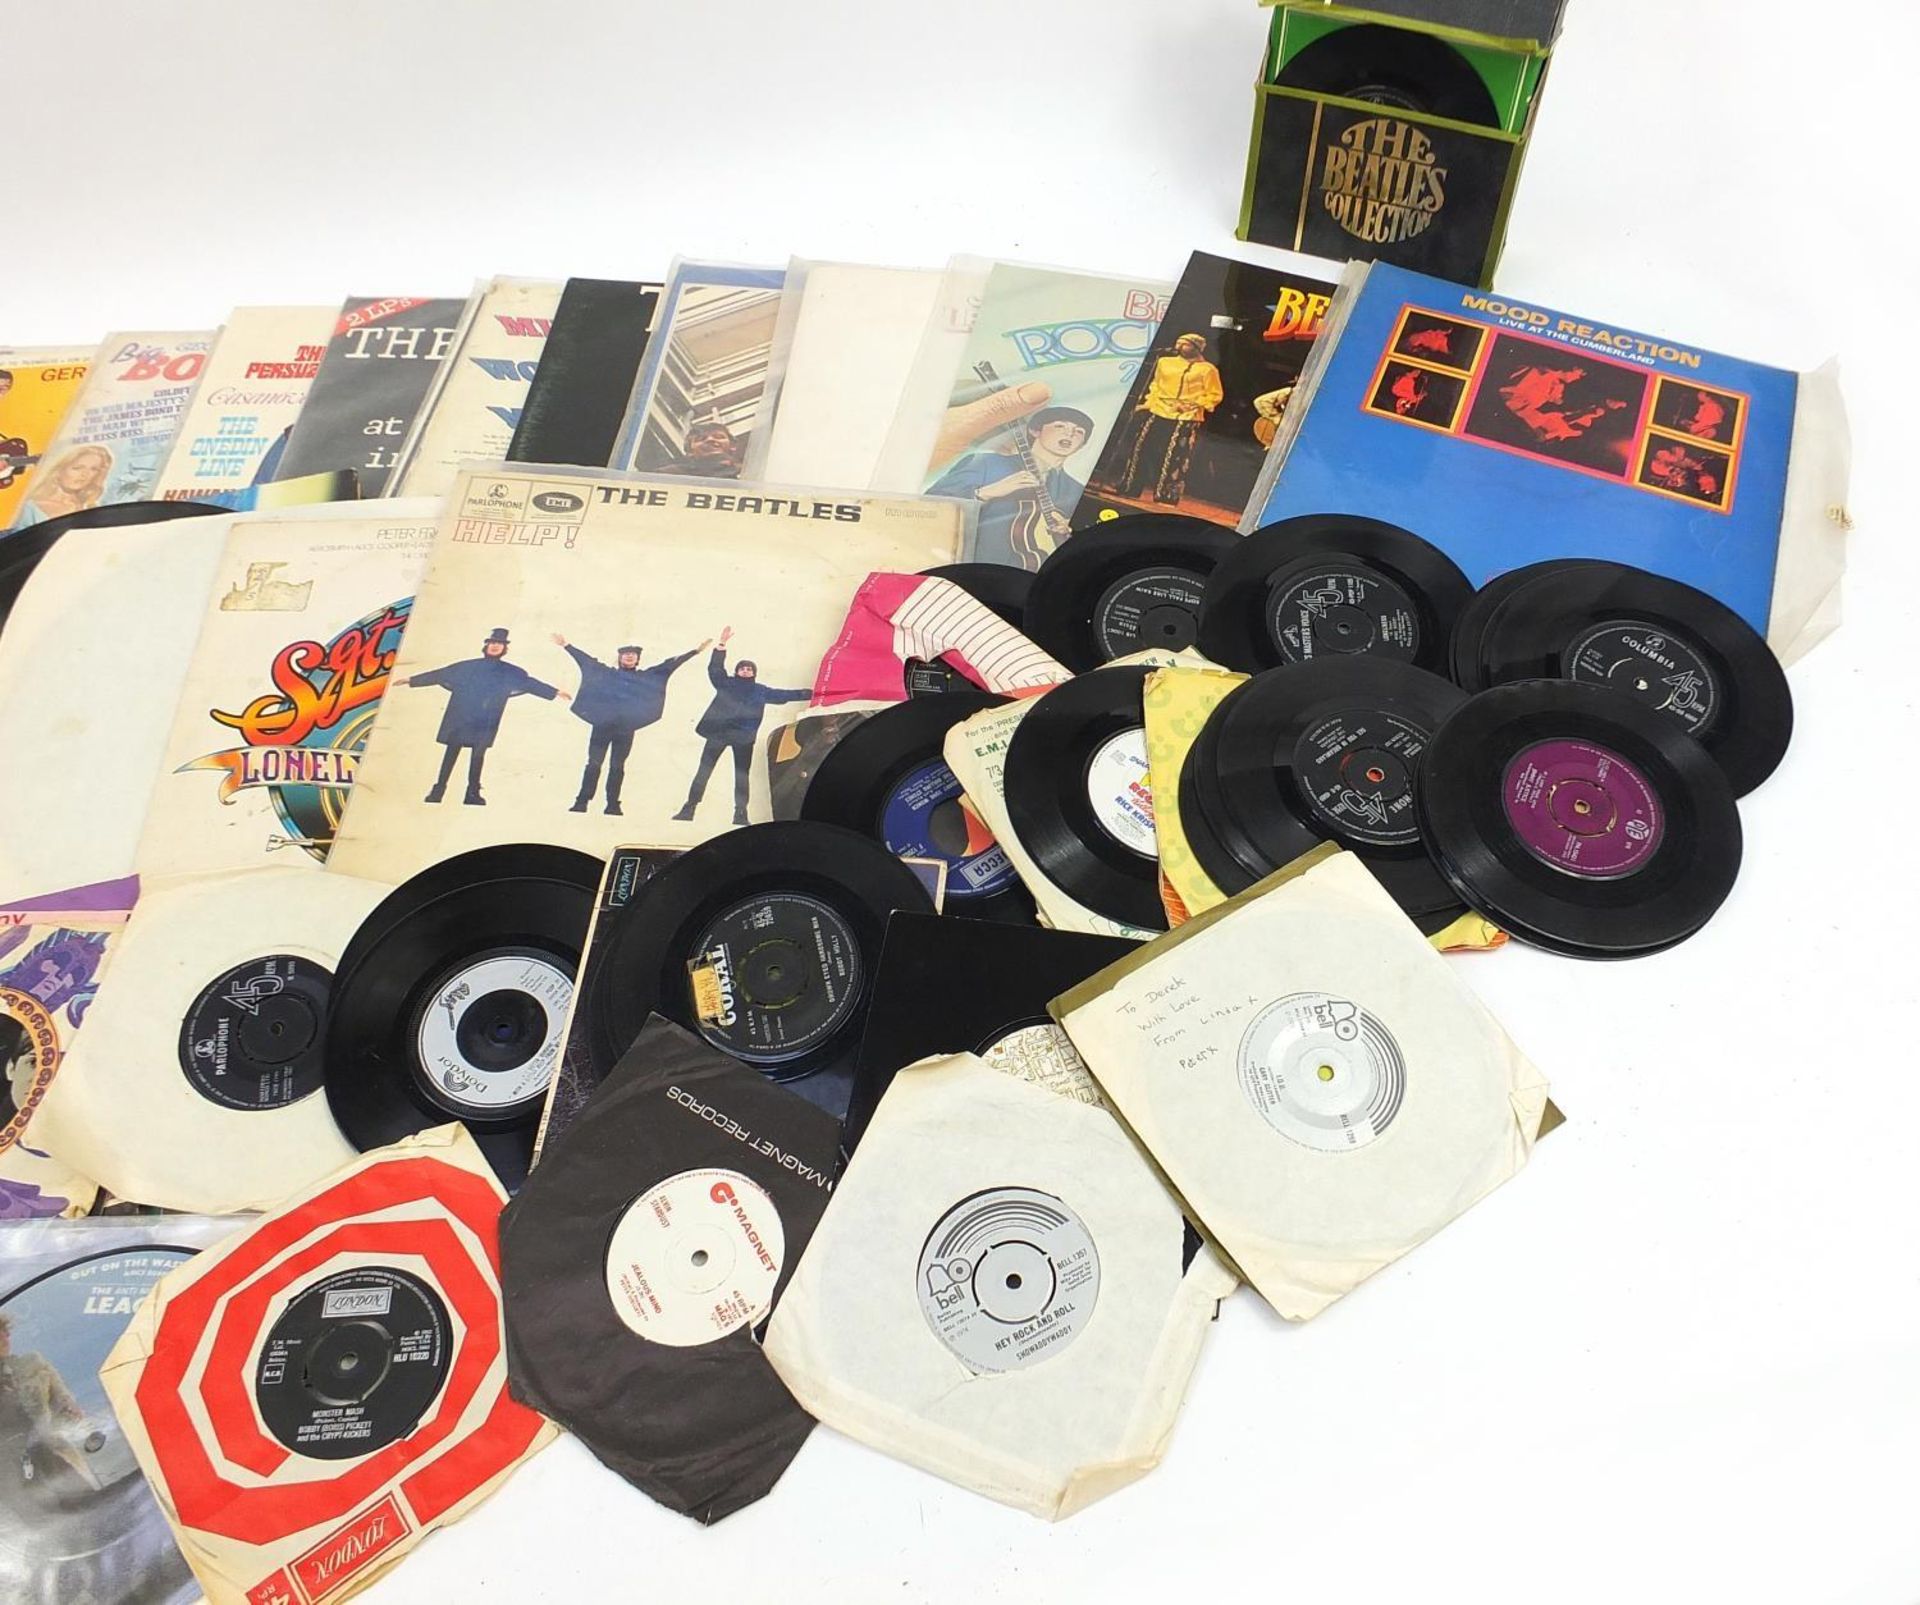 Vinyl LP's and 45rpm records including Led Zeppelin, The Beatles Collection and Abbey road - Bild 4 aus 6